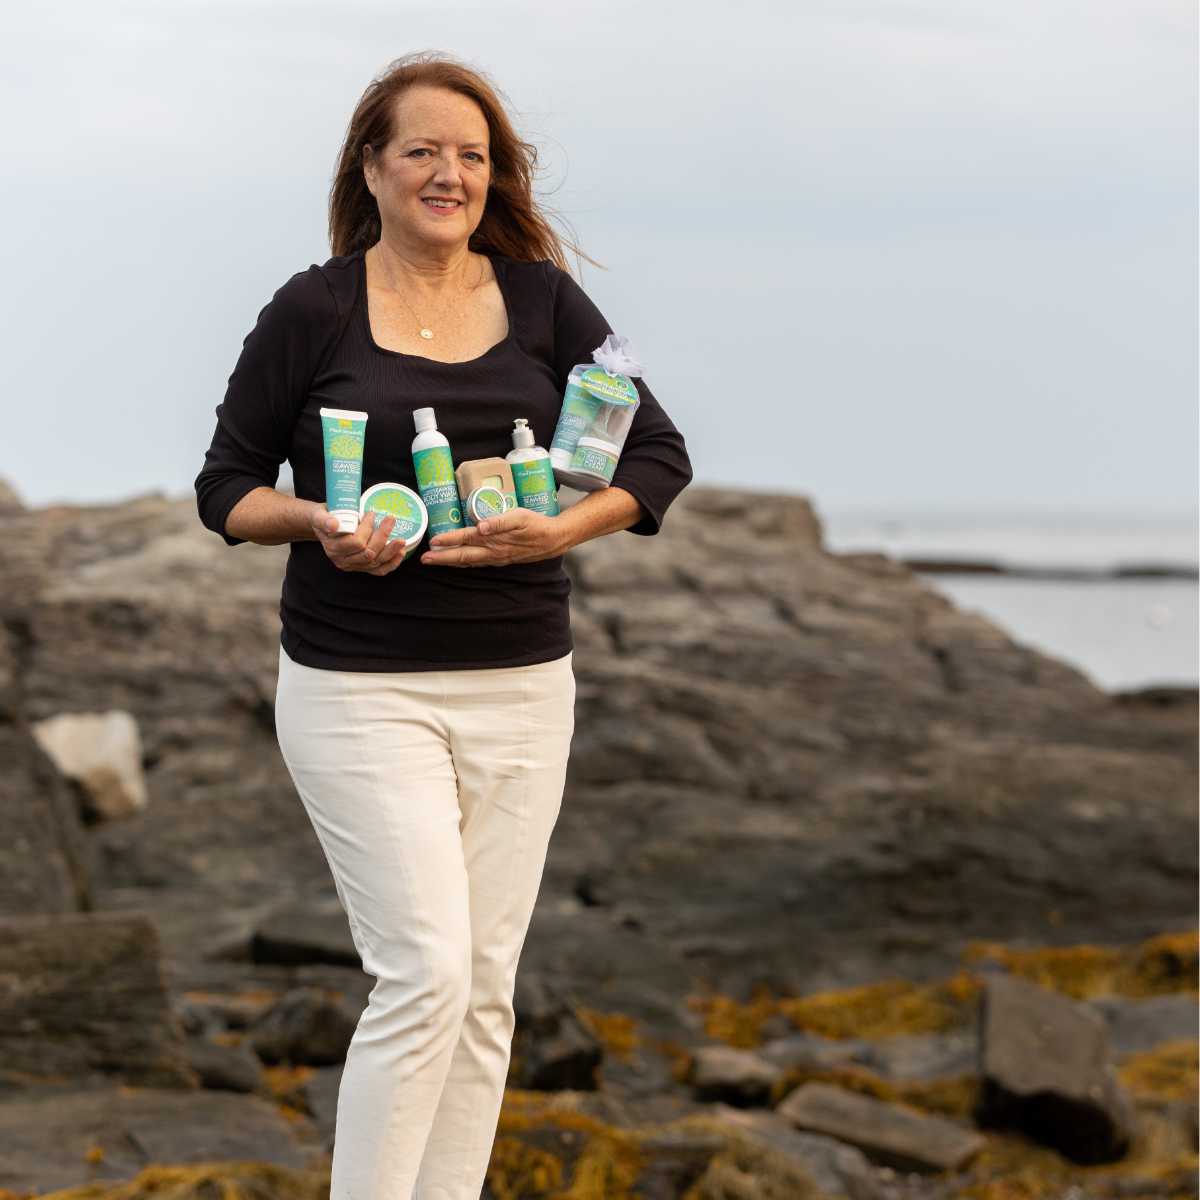 Planet Botanicals Founder to Present Benefits of Seaweed Cosmetics at Seagriculture USA September 6-7 in Portland, Maine